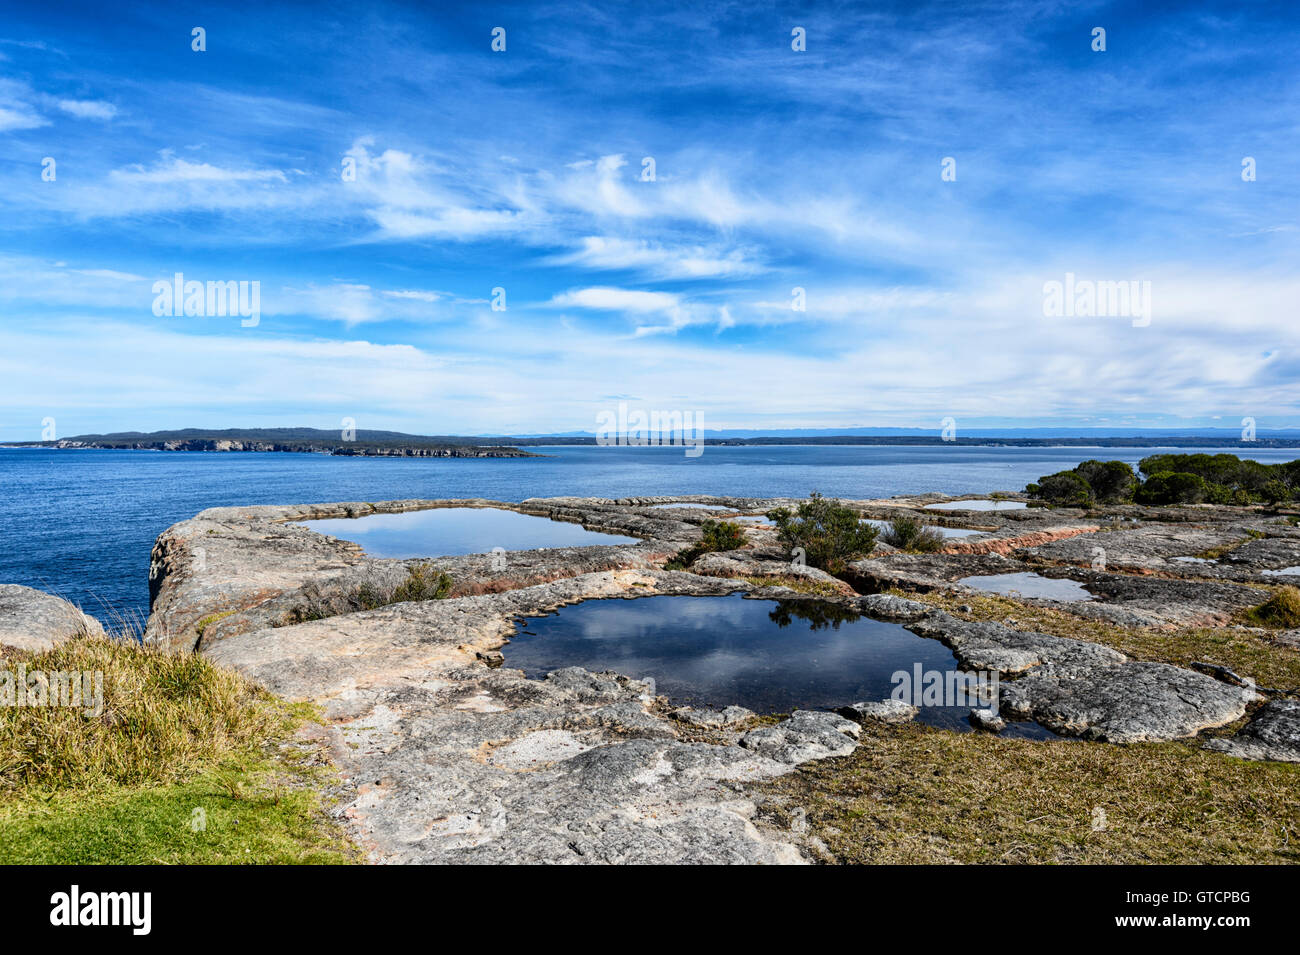 View of picturesque Jervis Bay from Point Perpendicular, New South Wales, NSW, Australia Stock Photo